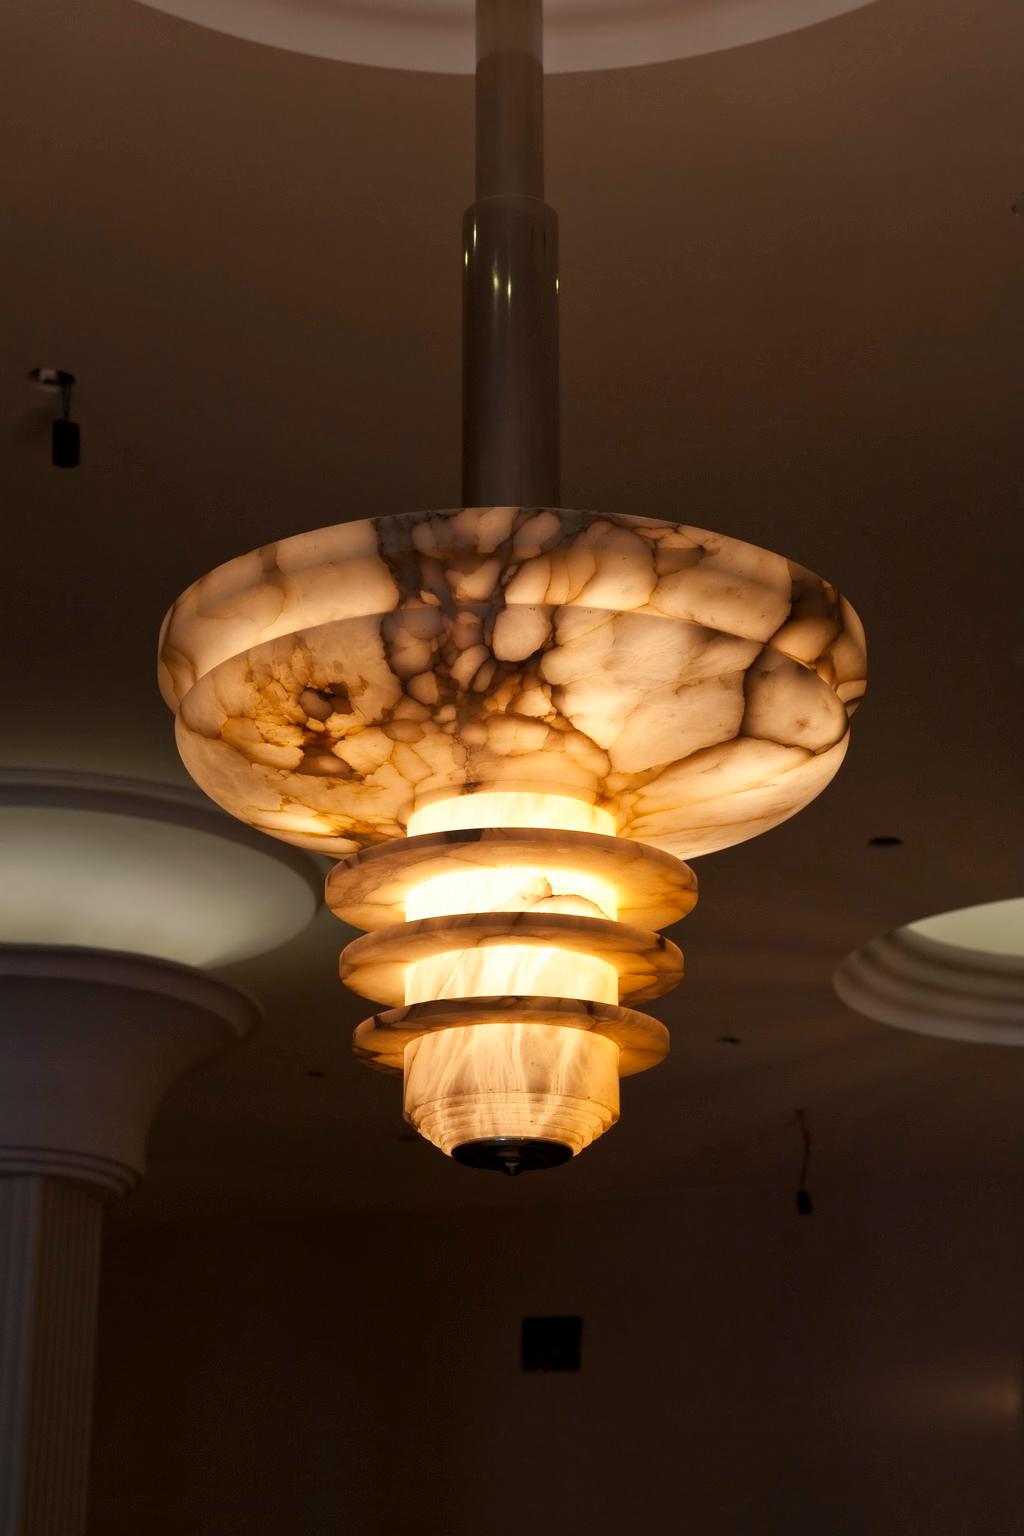 Amazing chandelier Art Deco  (alabaster light)

If you have problems to the hight, We can cut the barral, at the indicated height (free of charge)
Style: Art Deco
Year: 1935
Material: alabaster and chrome
To take care of your property and the lives